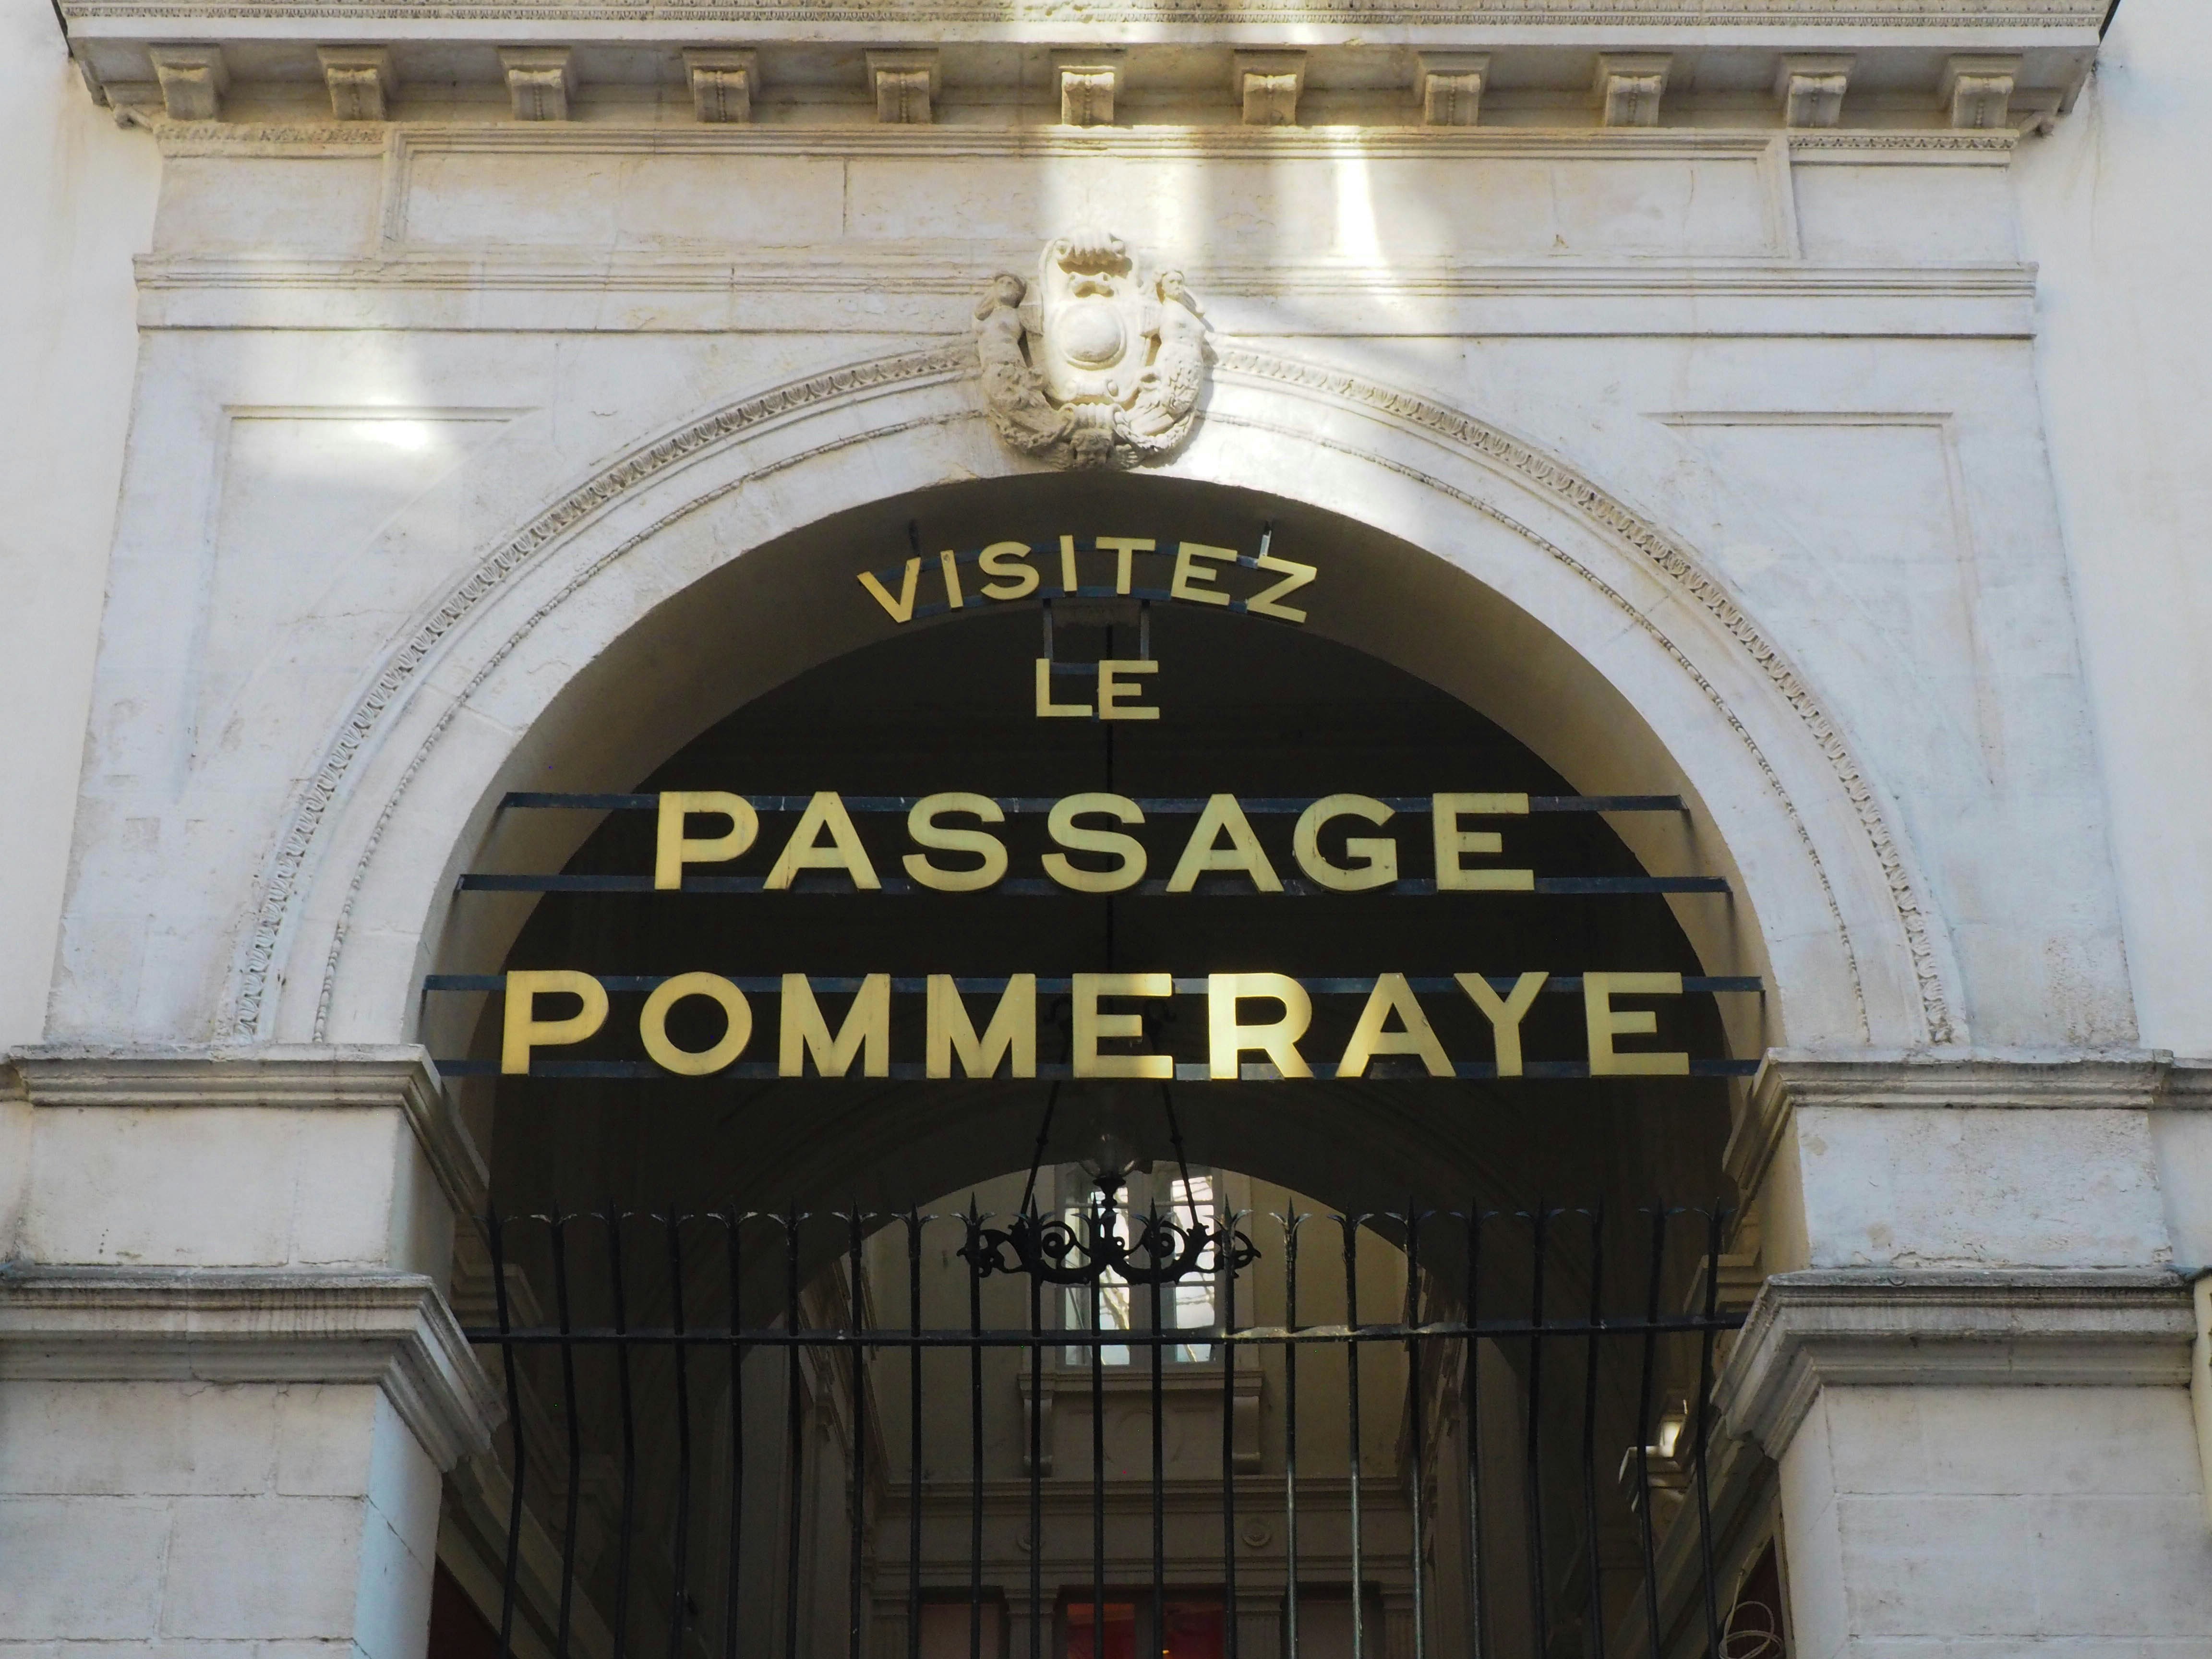 Sign on a side entrance of the Pommeray Passage